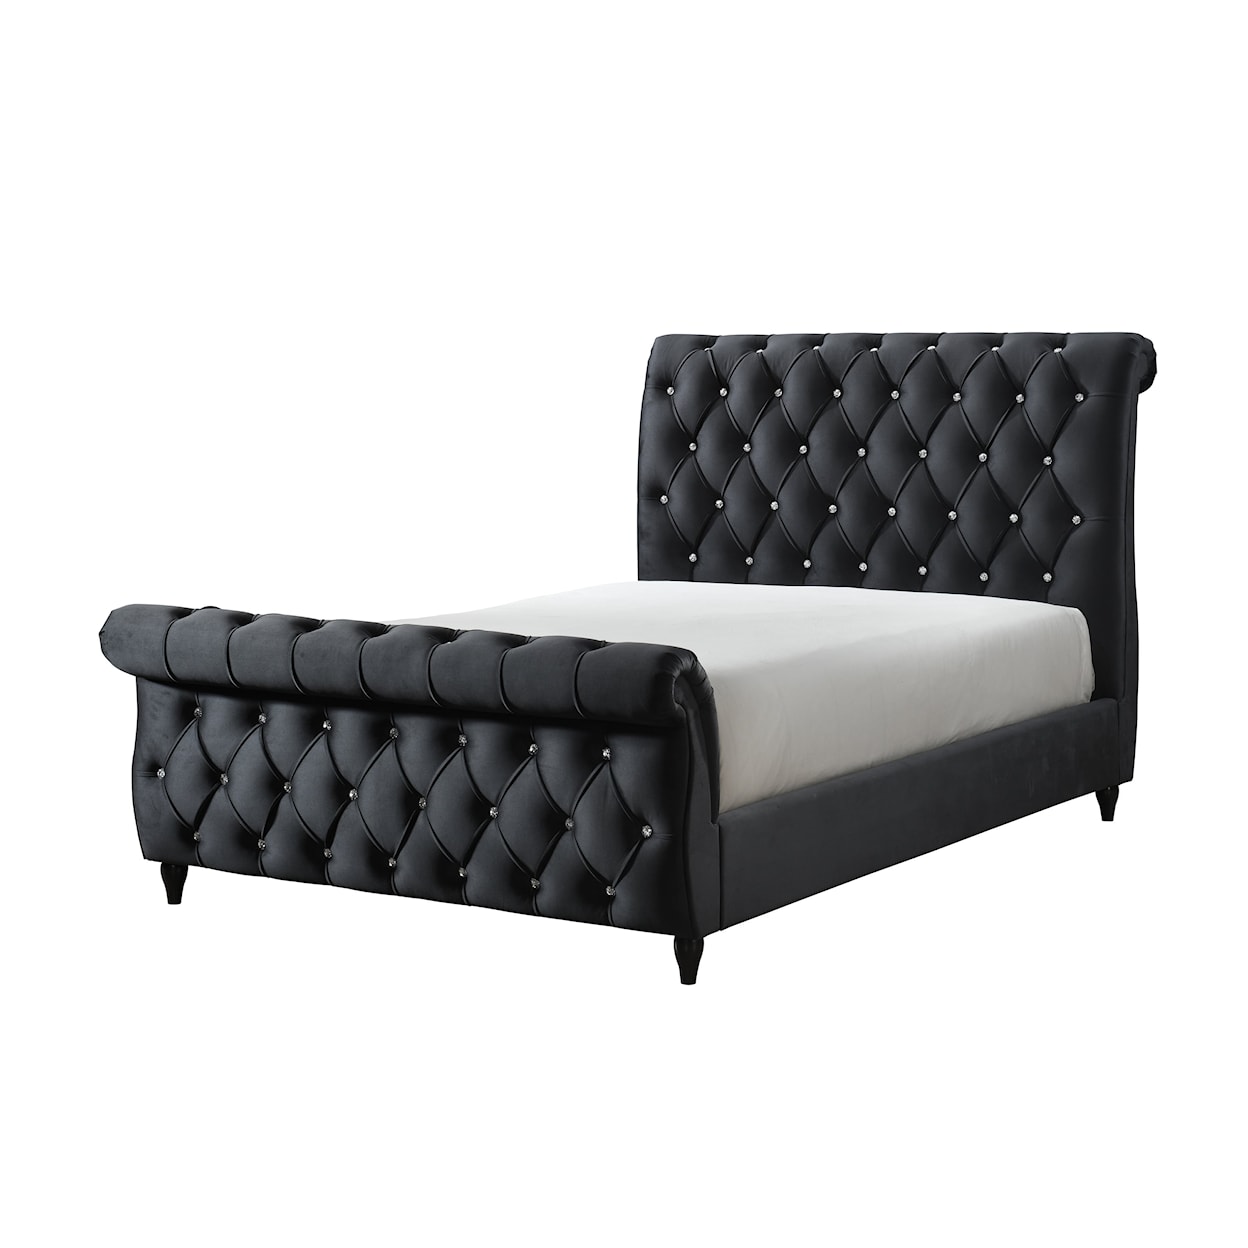 Crown Mark Kyrie King Upholstered Bed